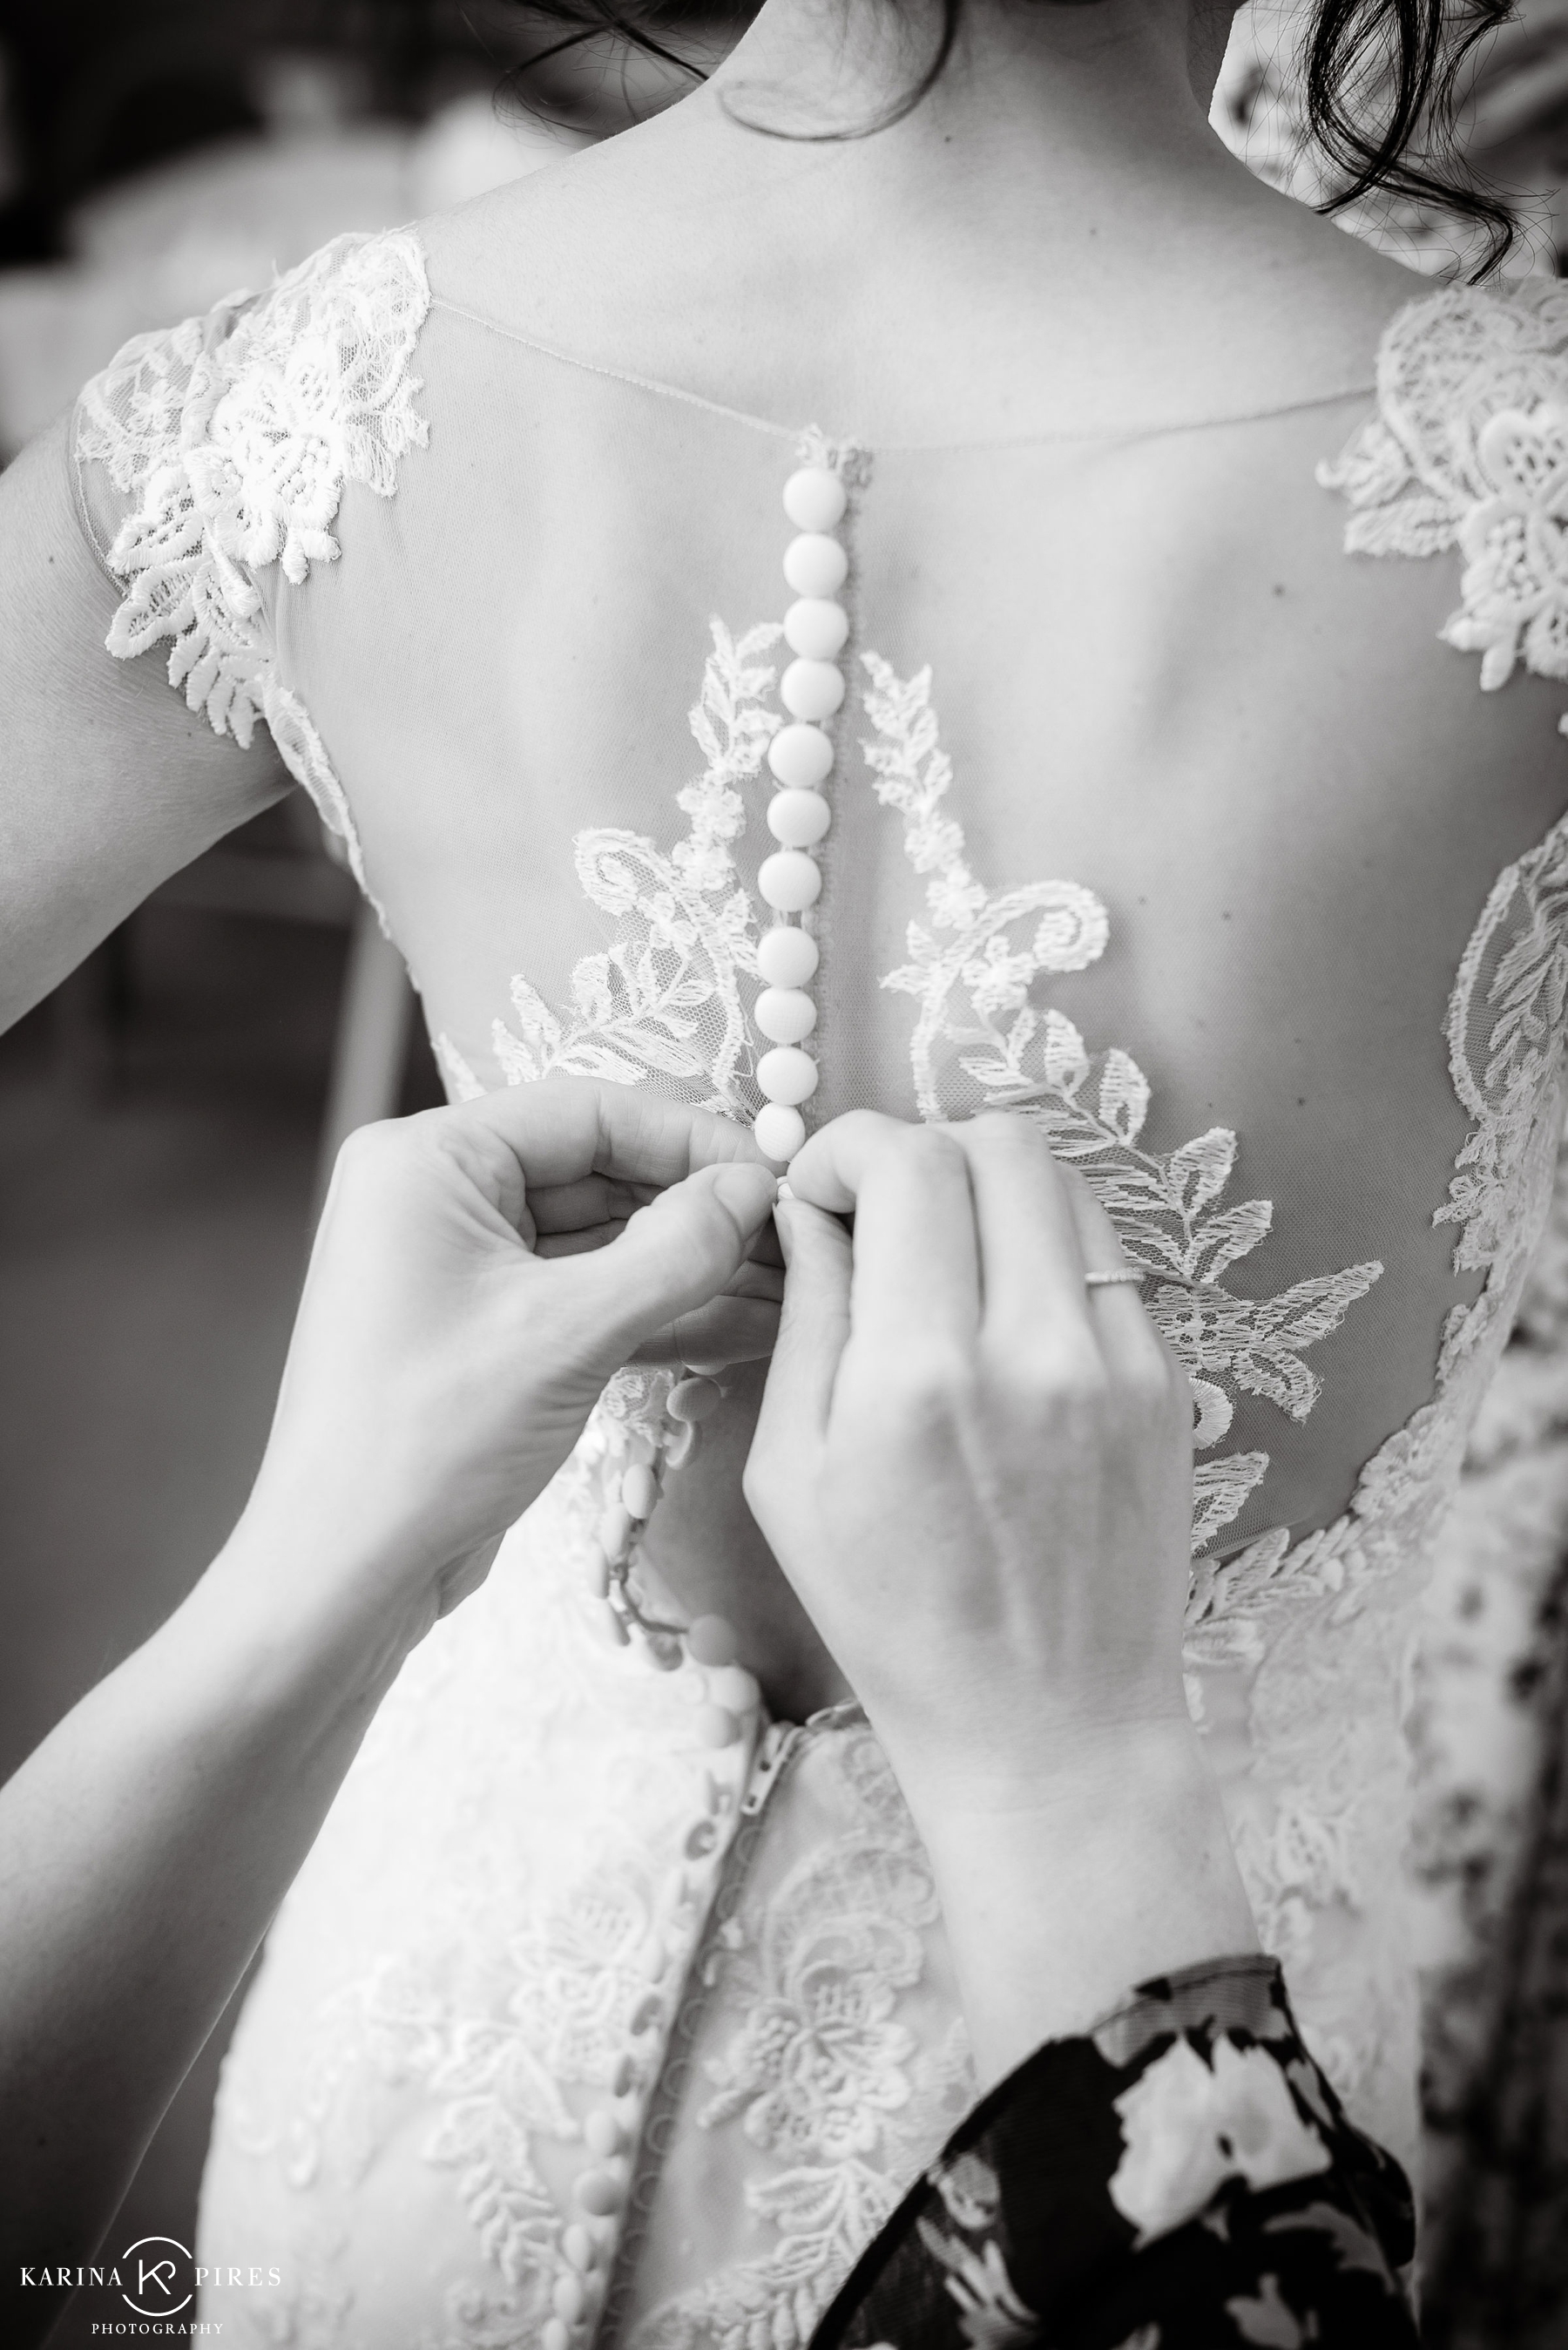  Annie in a lace wedding gown, with a sheer illusion back – Bride getting ready photos by Karina Pires Photography